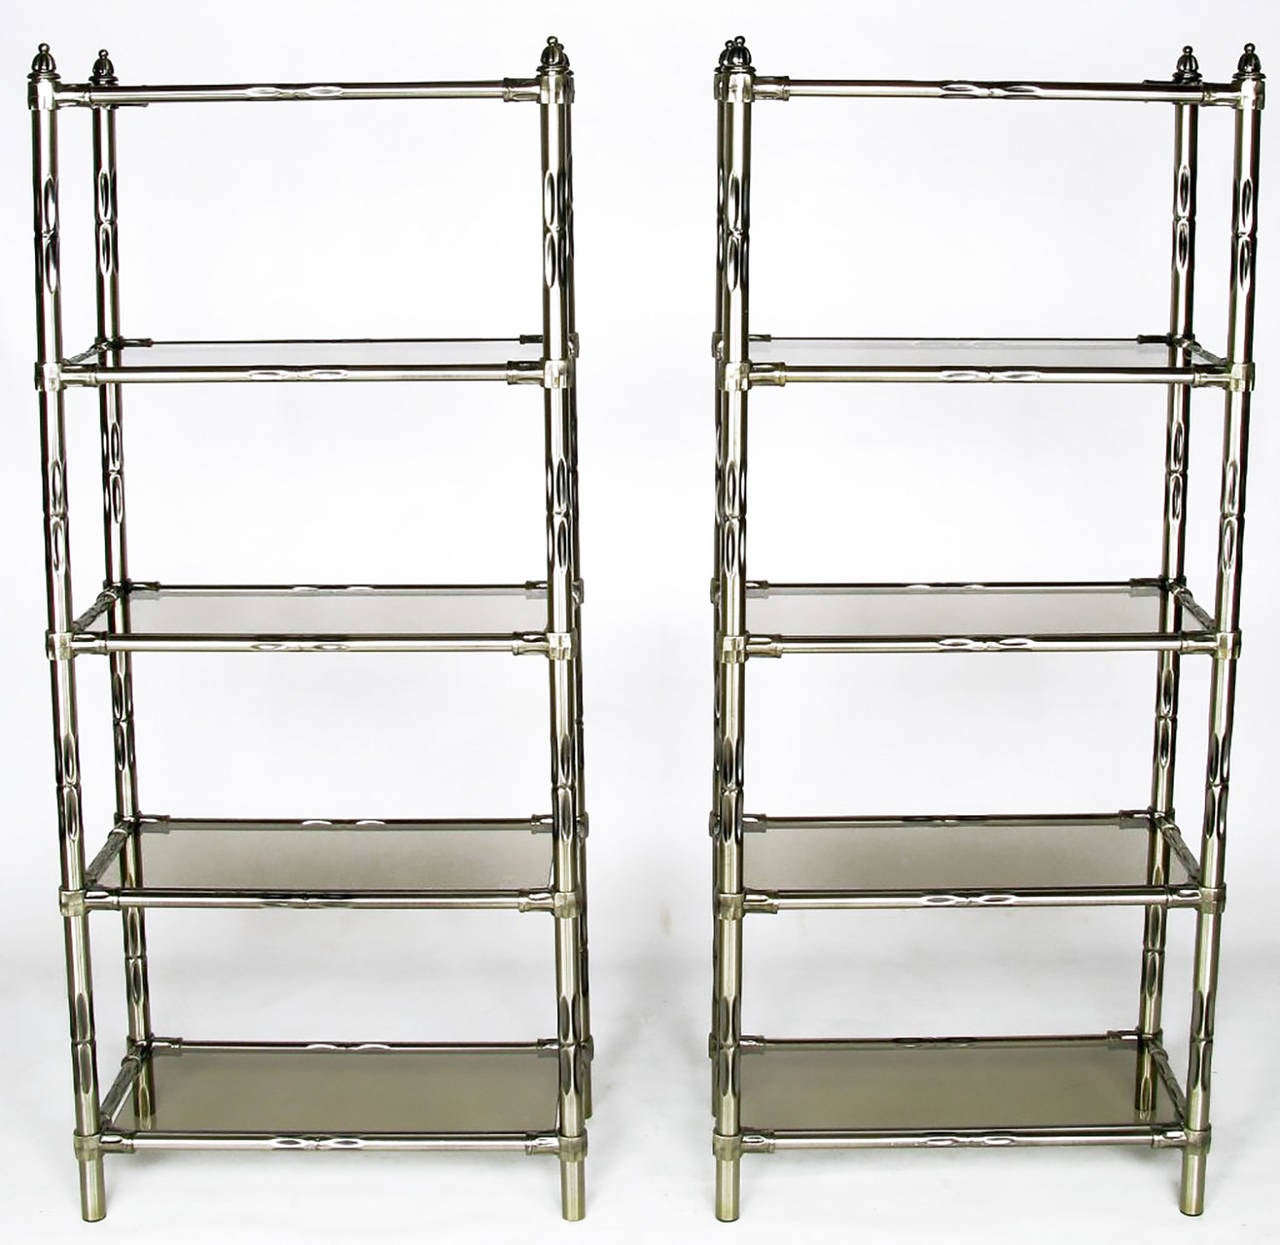 Pair of metal faux bamboo étagère in an antiqued nickel, or gunmetal, finish. They feature rugged cast metal joinery and smoked glass shelves, surmounted by cap and ball finals.